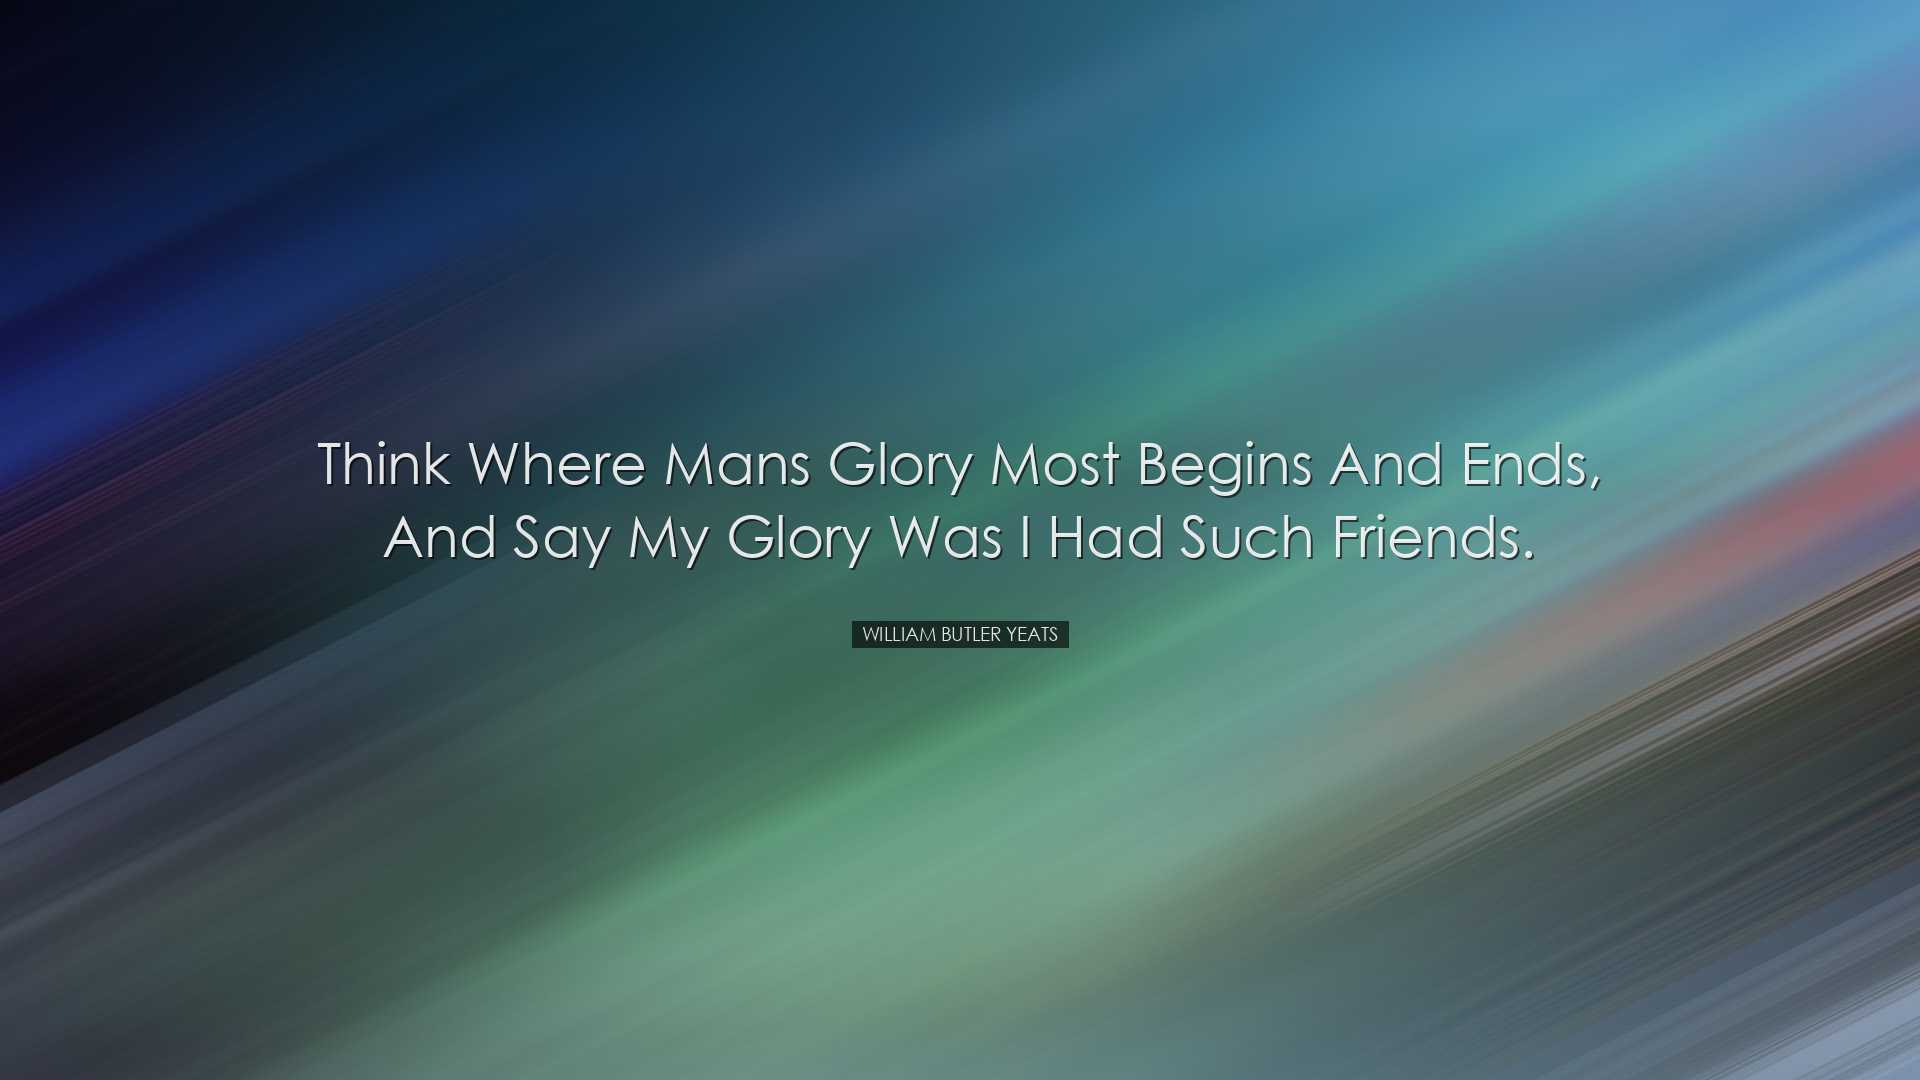 Think where mans glory most begins and ends, and say my glory was